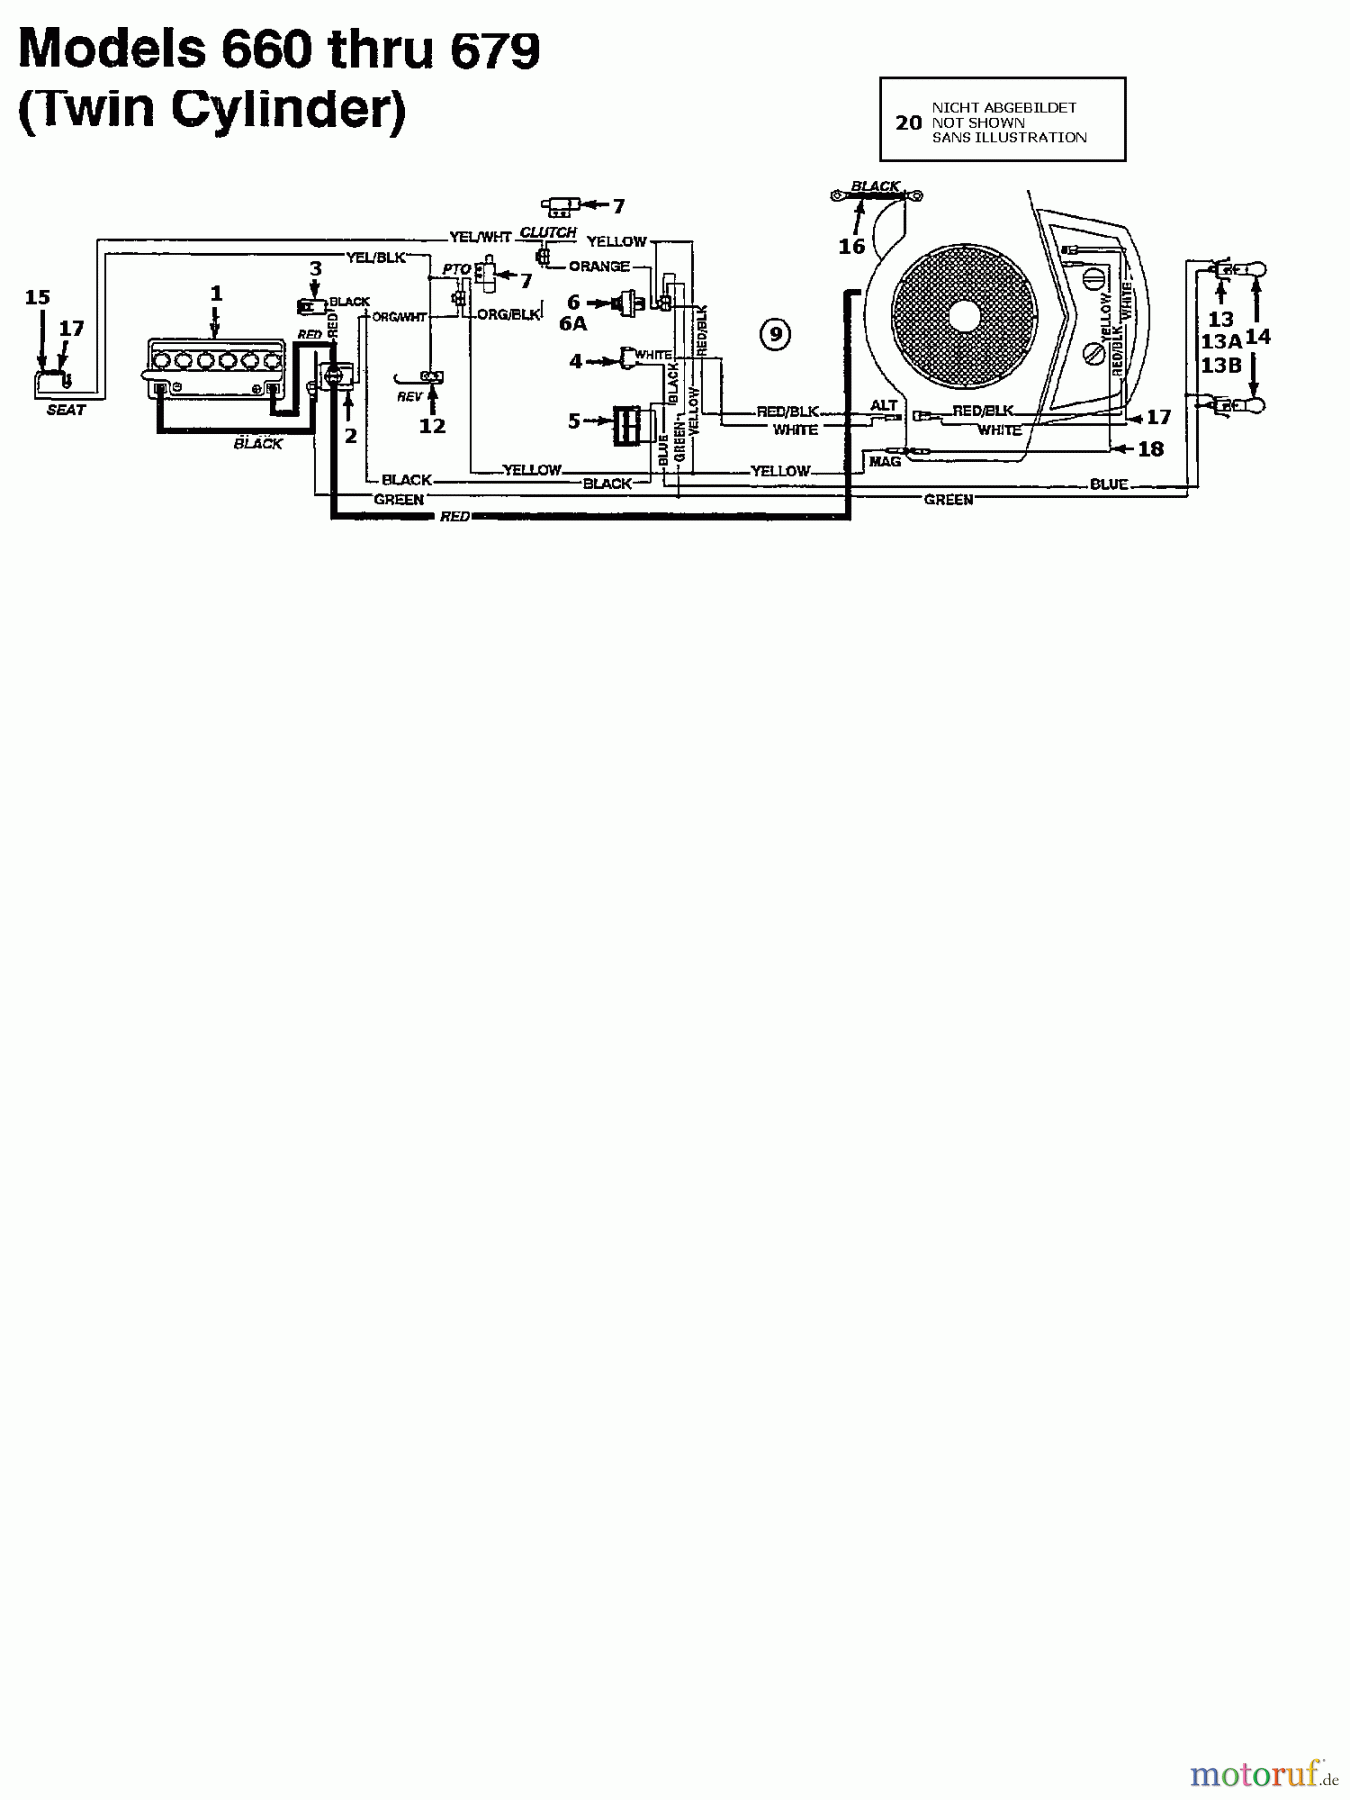  Columbia Lawn tractors 125/76 N 135L661C626  (1995) Wiring diagram twin cylinder